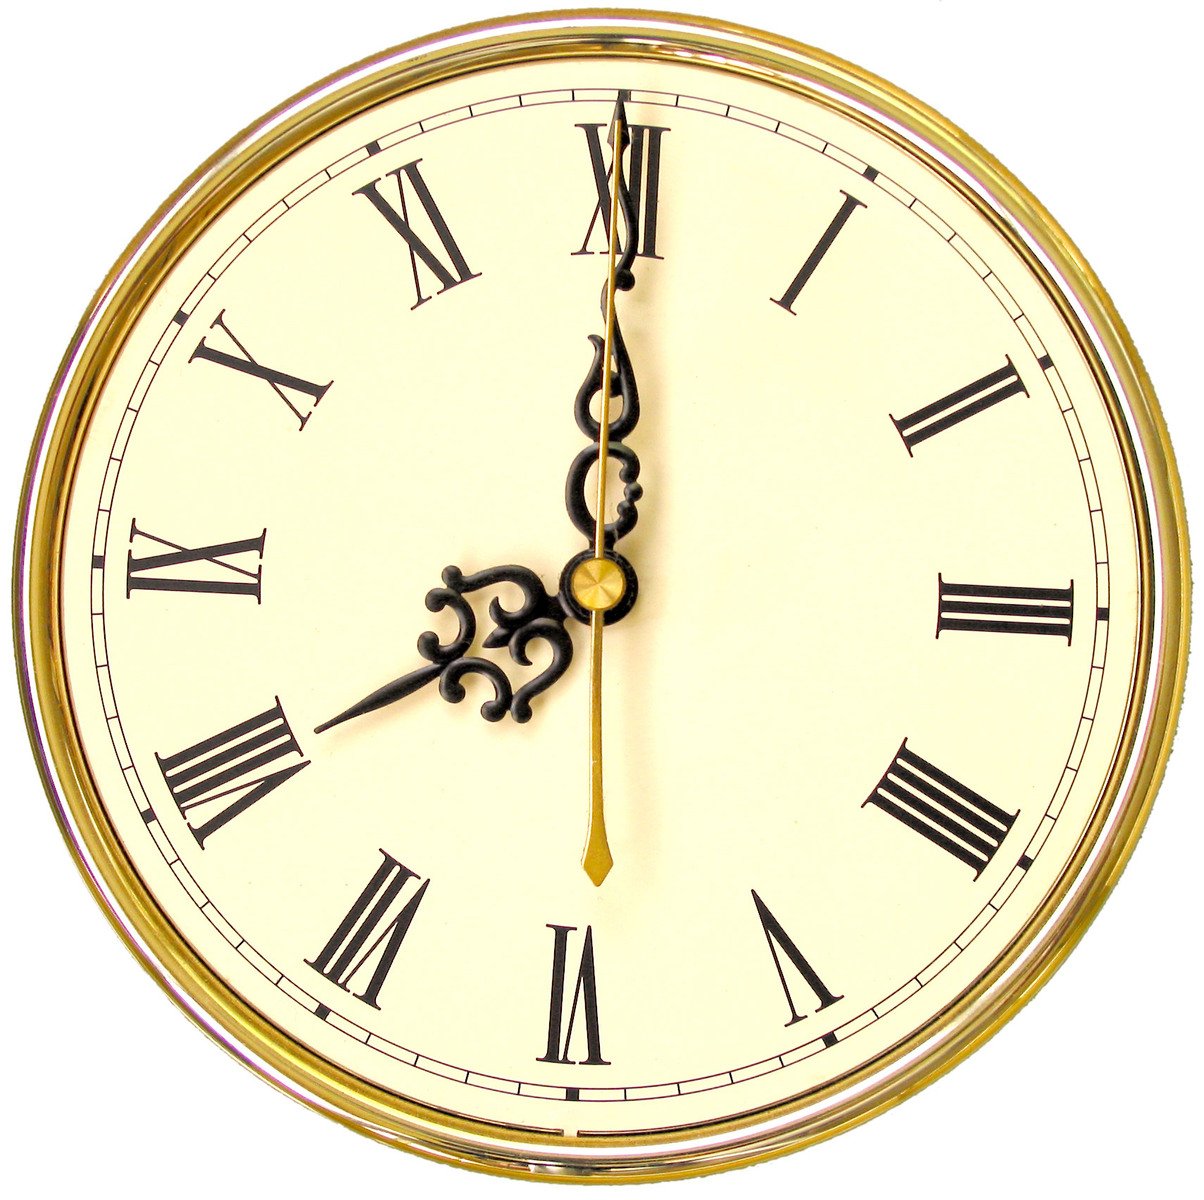 a clock with roman numerals is shown